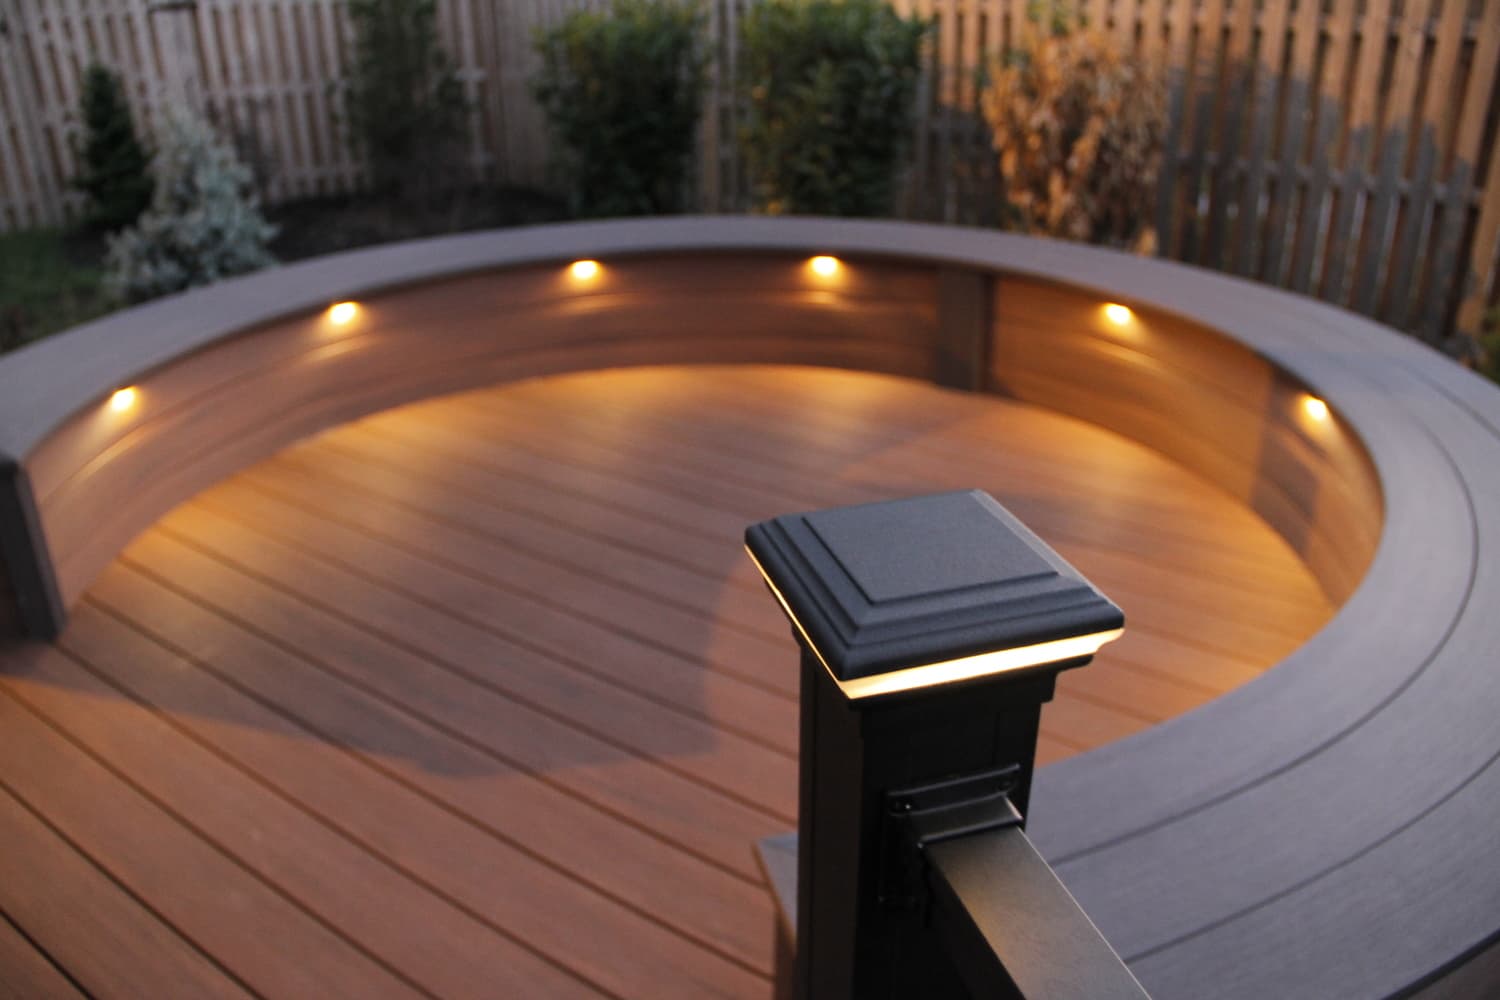 Deck lighting is used to illuminate a sitting area on a deck